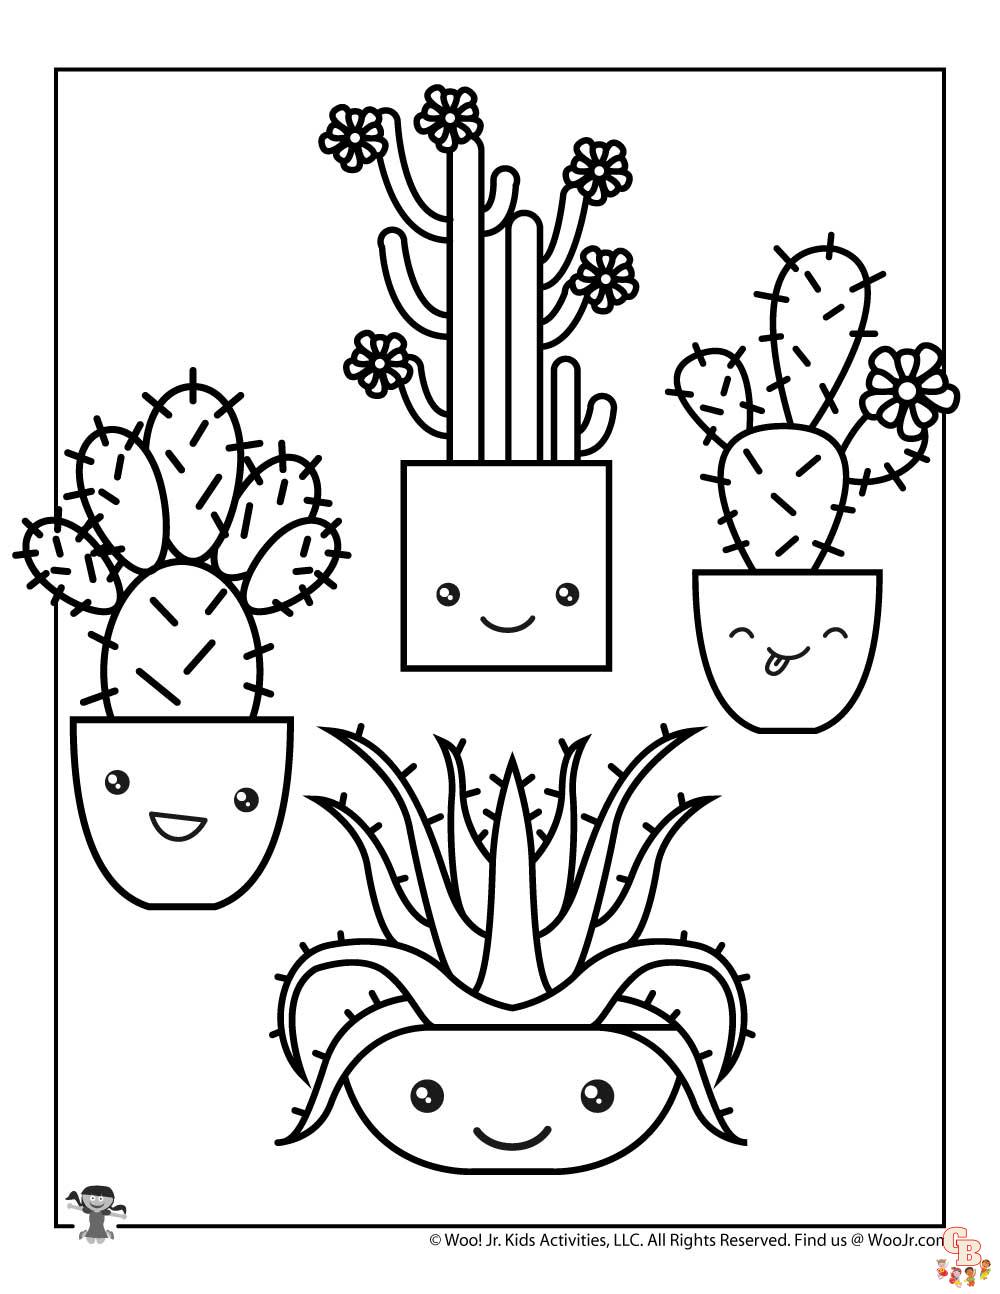 Winter Adult Coloring Pages  Woo! Jr. Kids Activities